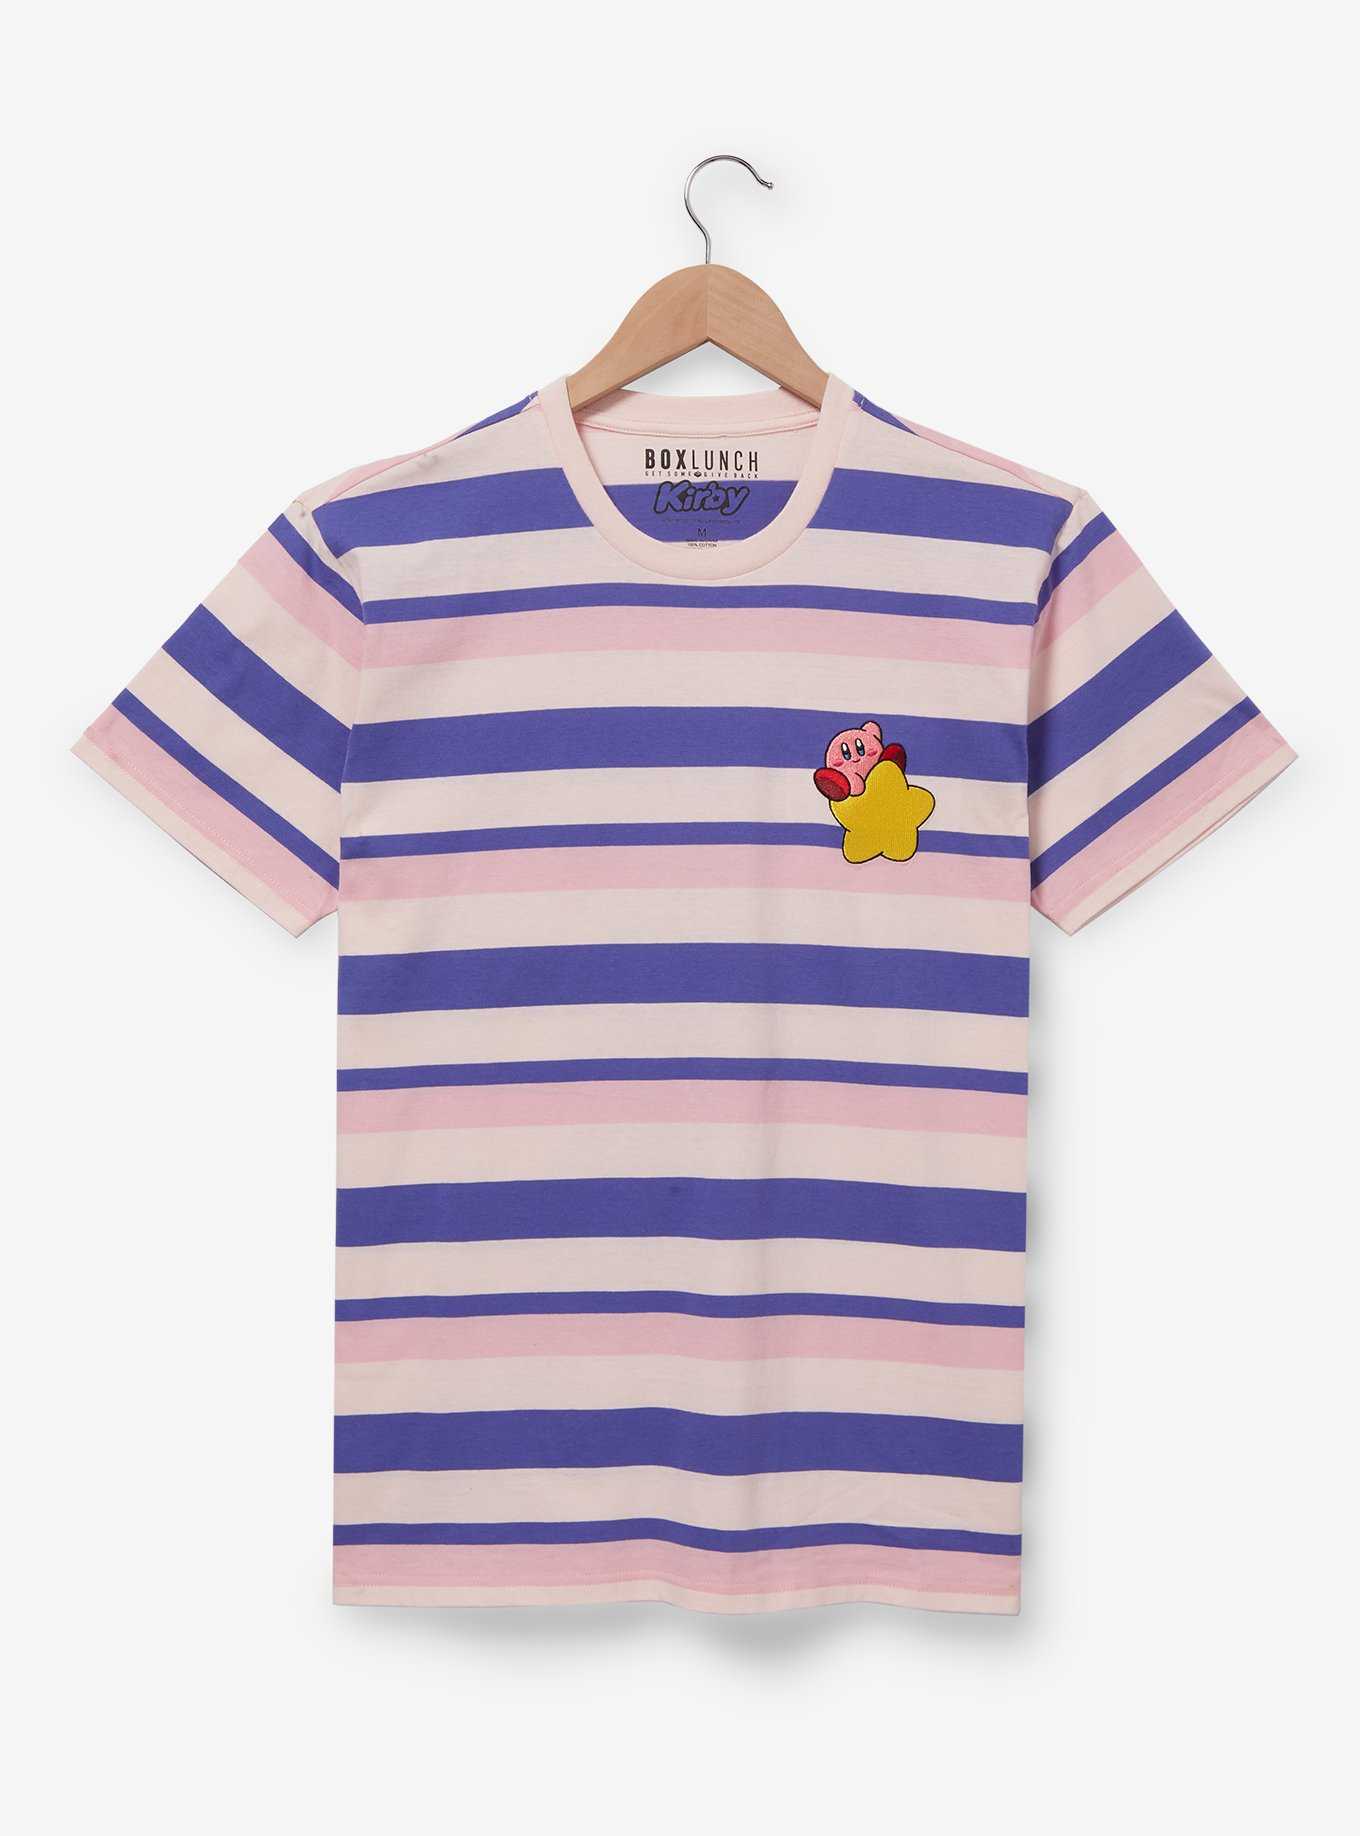 Nintendo Kirby Striped Portrait T-Shirt - BoxLunch Exclusive, , hi-res